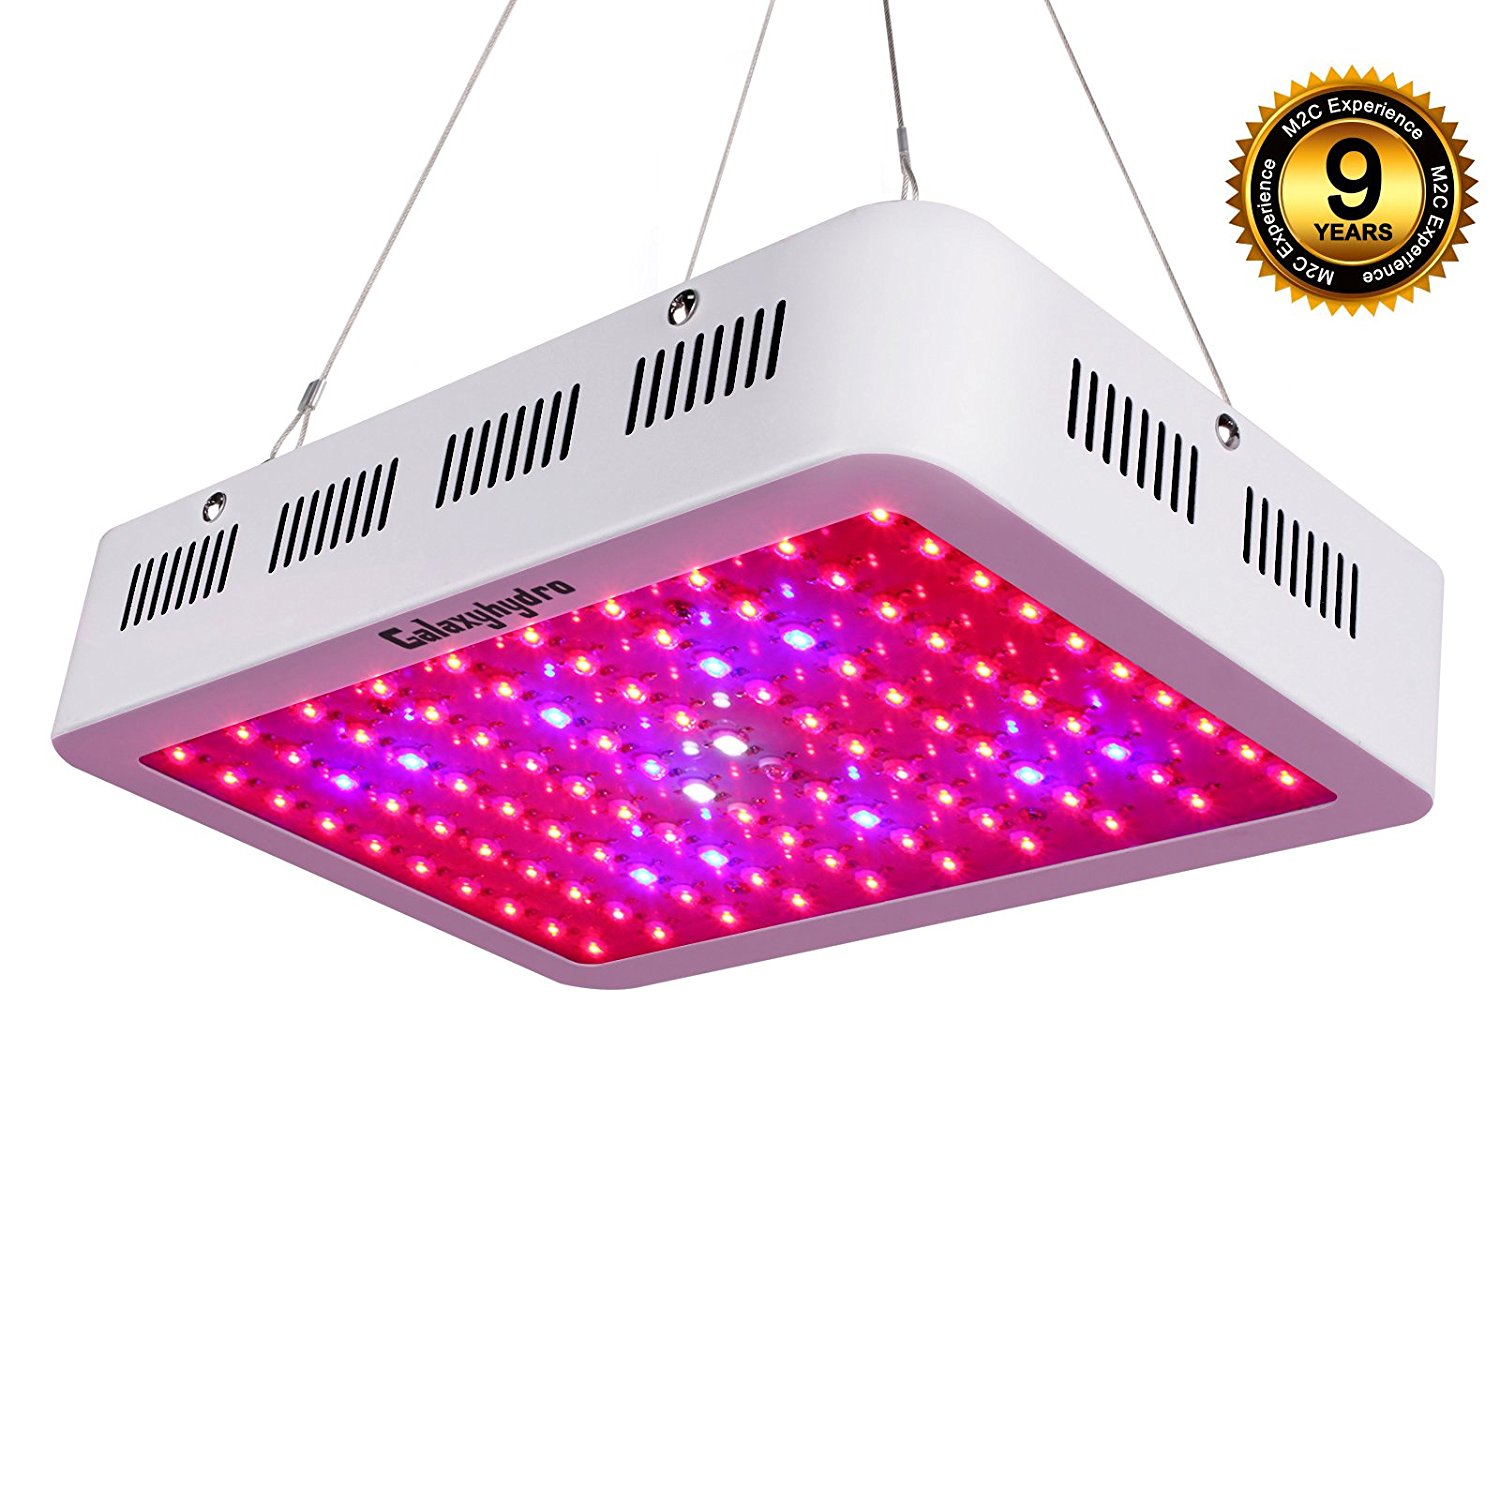 Top 10 Best Cheap LED Grow Lights For Cannabis The Ultimate List